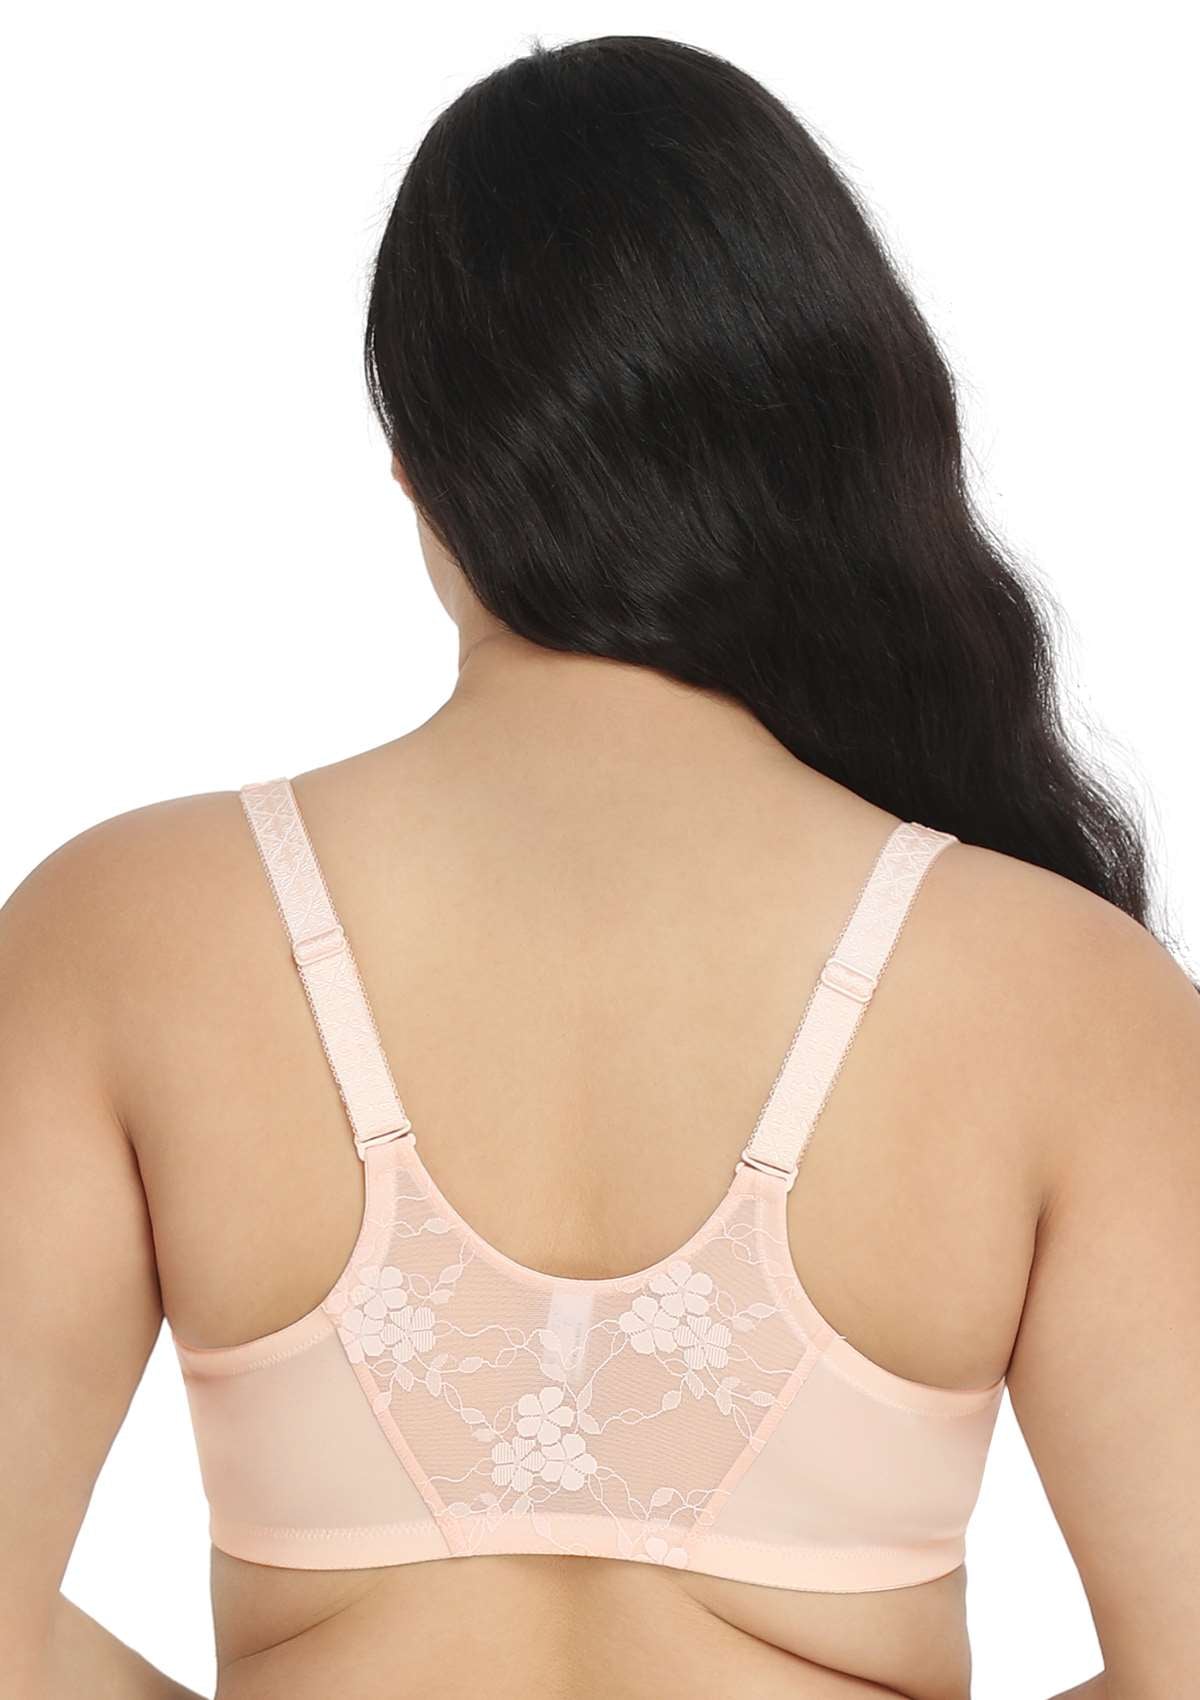 HSIA Spring Romance Front-Close Floral Lace Unlined Full Coverage Bra - Dusty Peach / 38 / DDD/F